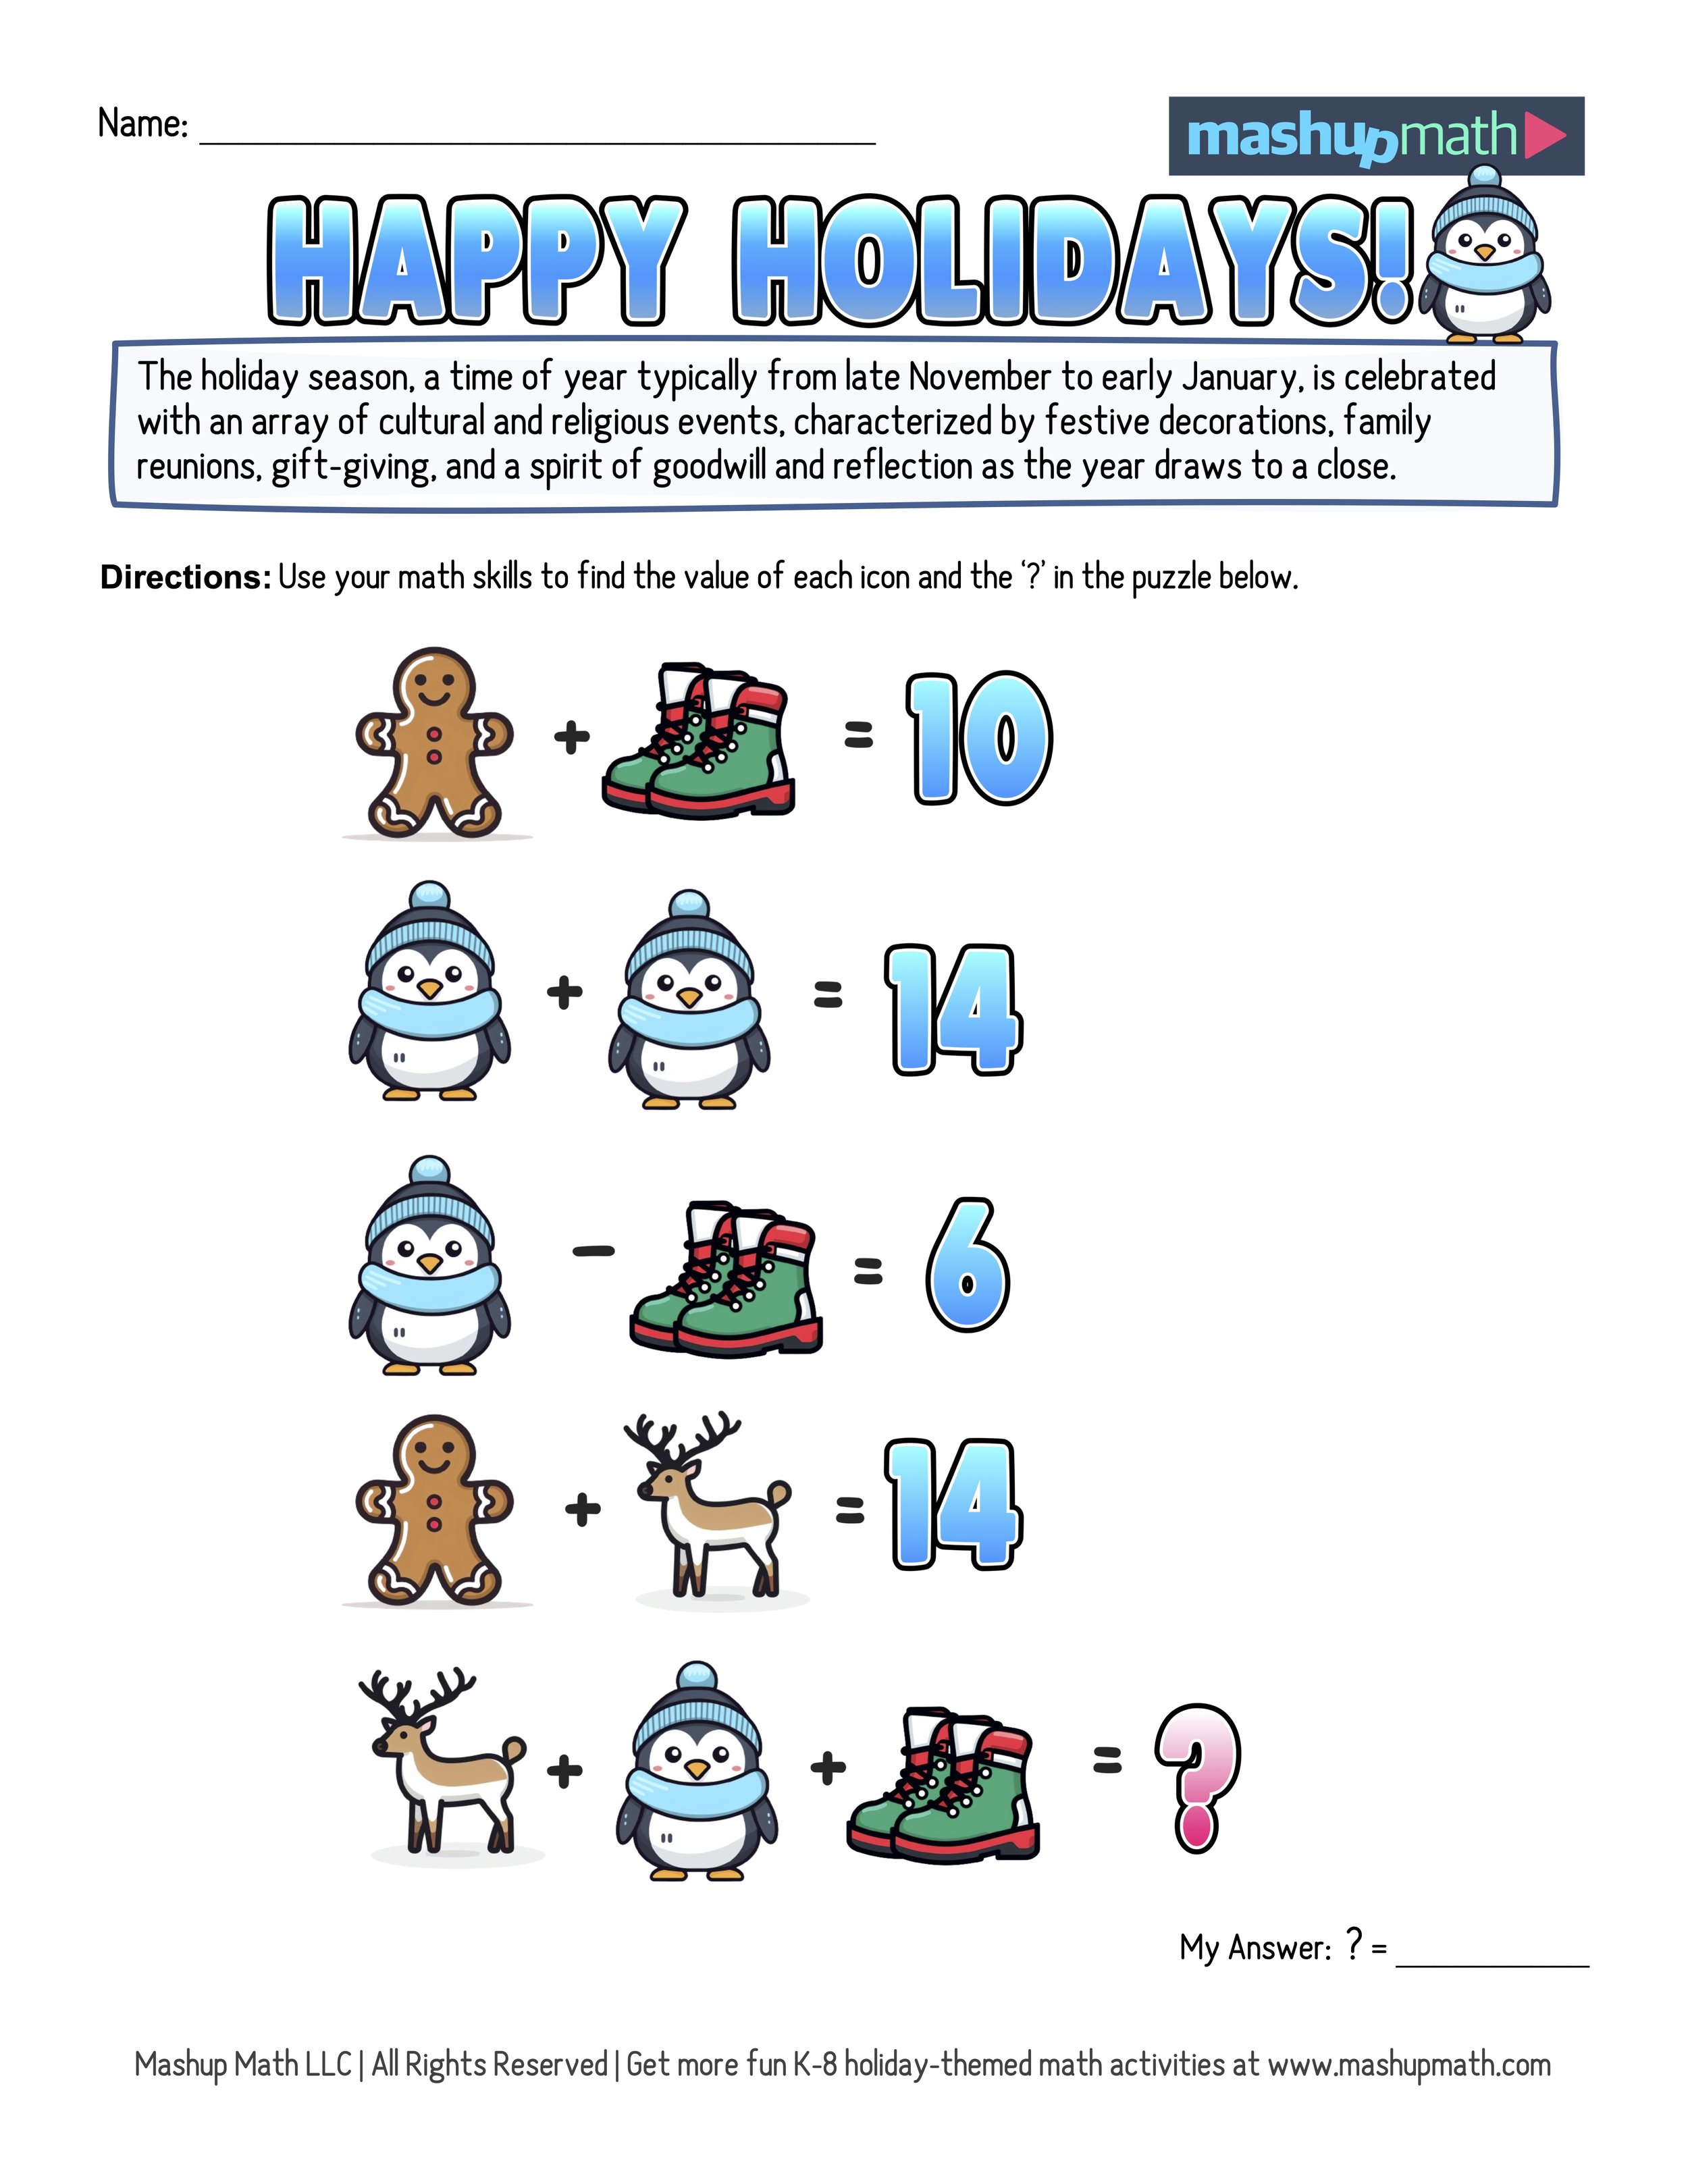 12 days of christmas problem solving